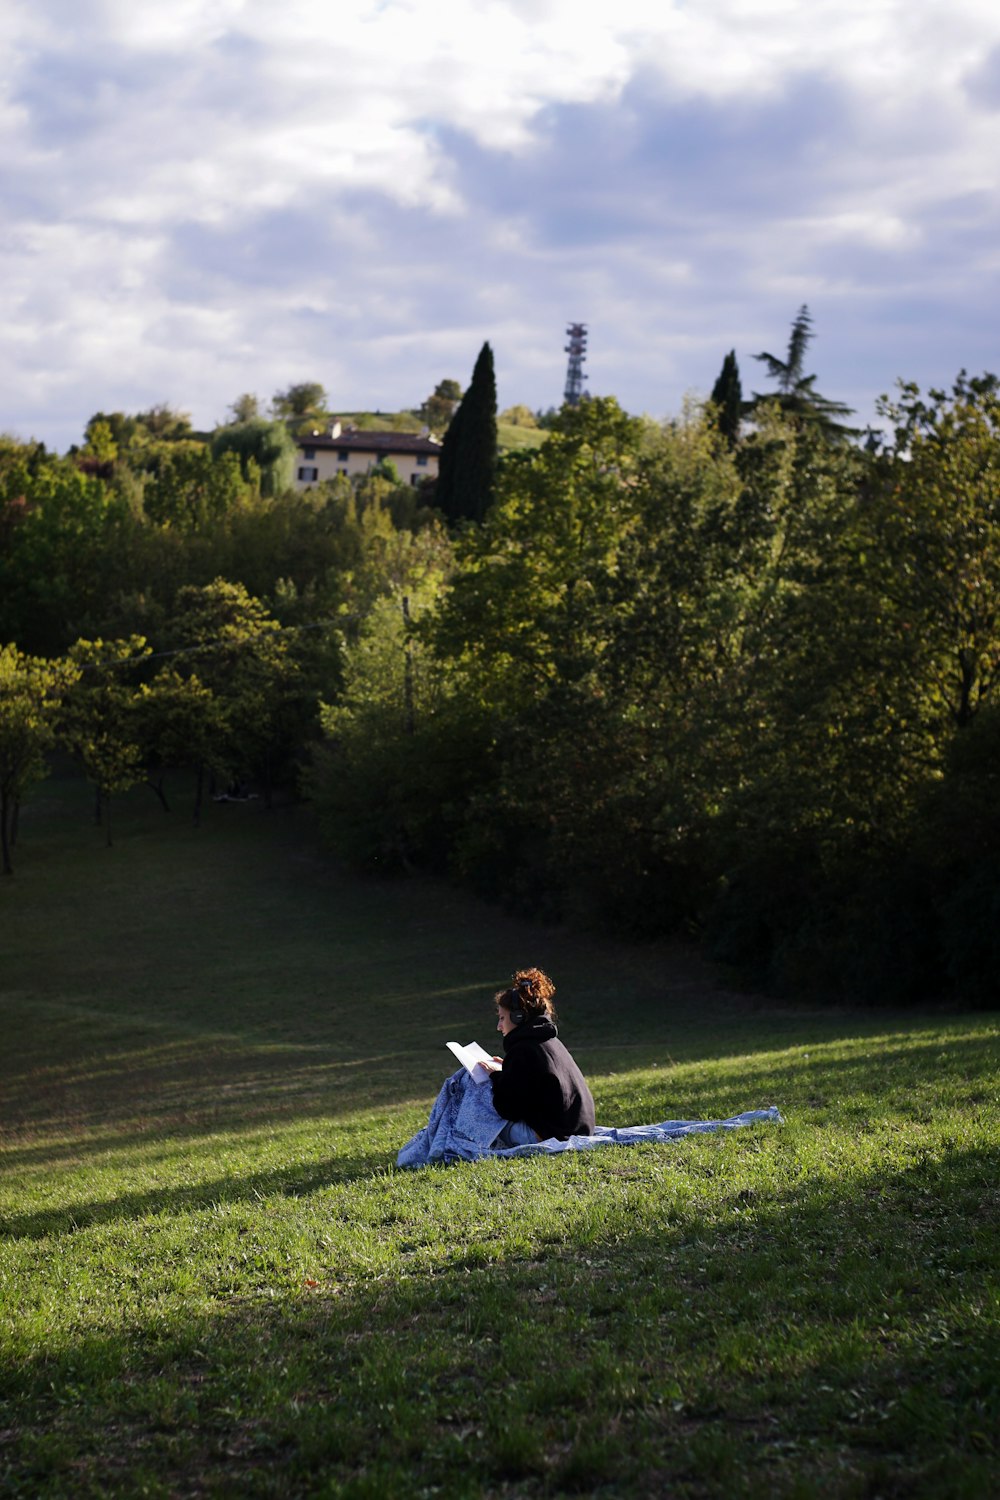 woman in blue dress sitting on green grass field during daytime